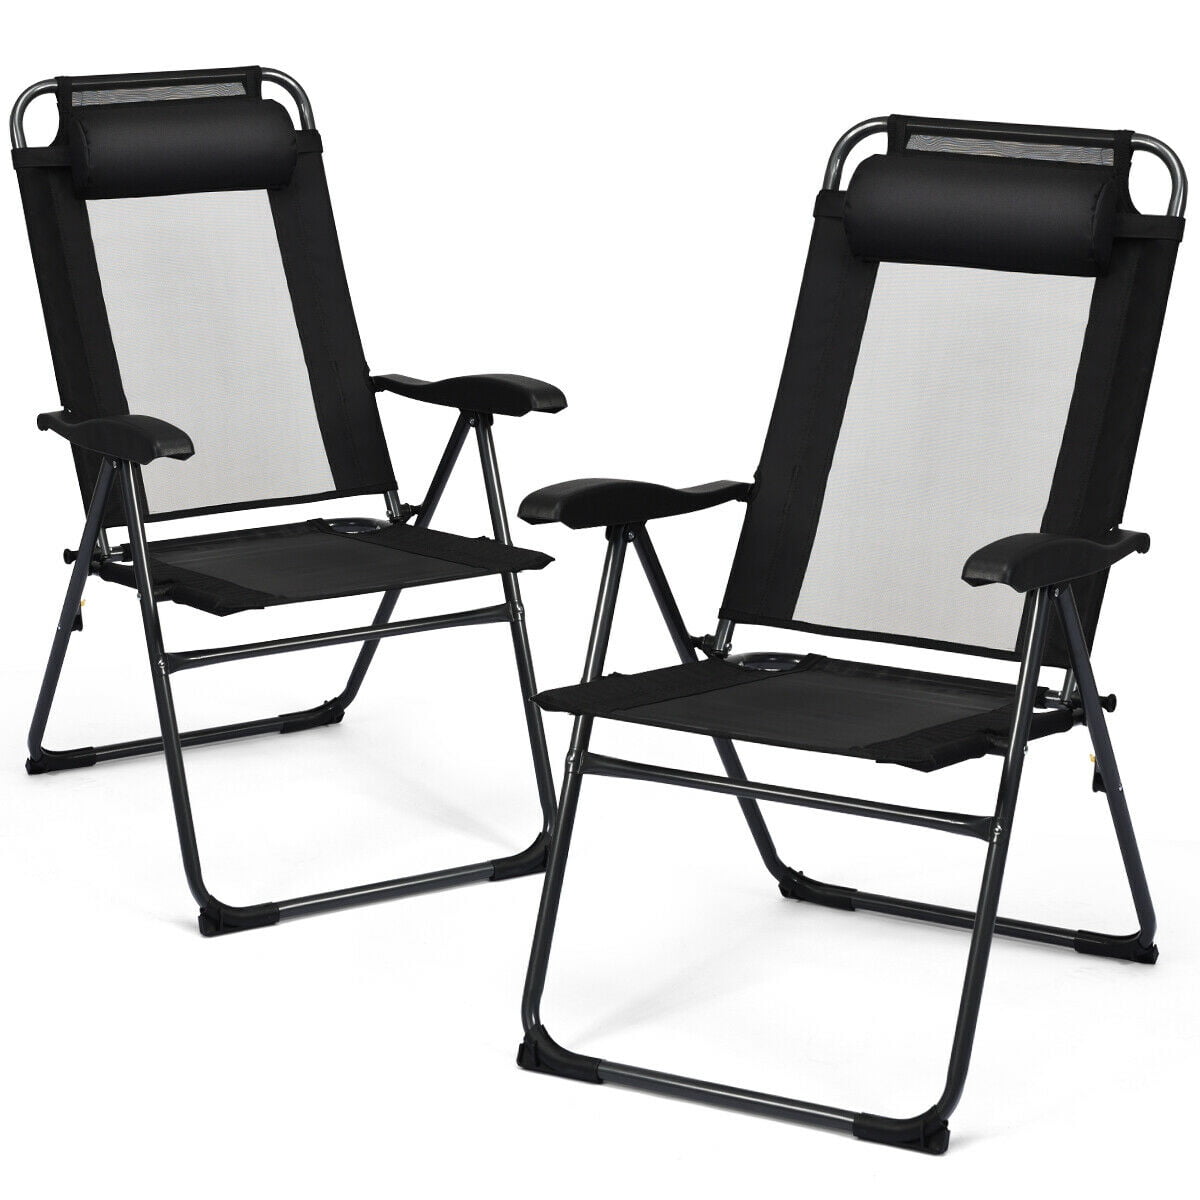 Gymax 2pc Folding Chairs Adjustable Reclining Chairs With Headrest